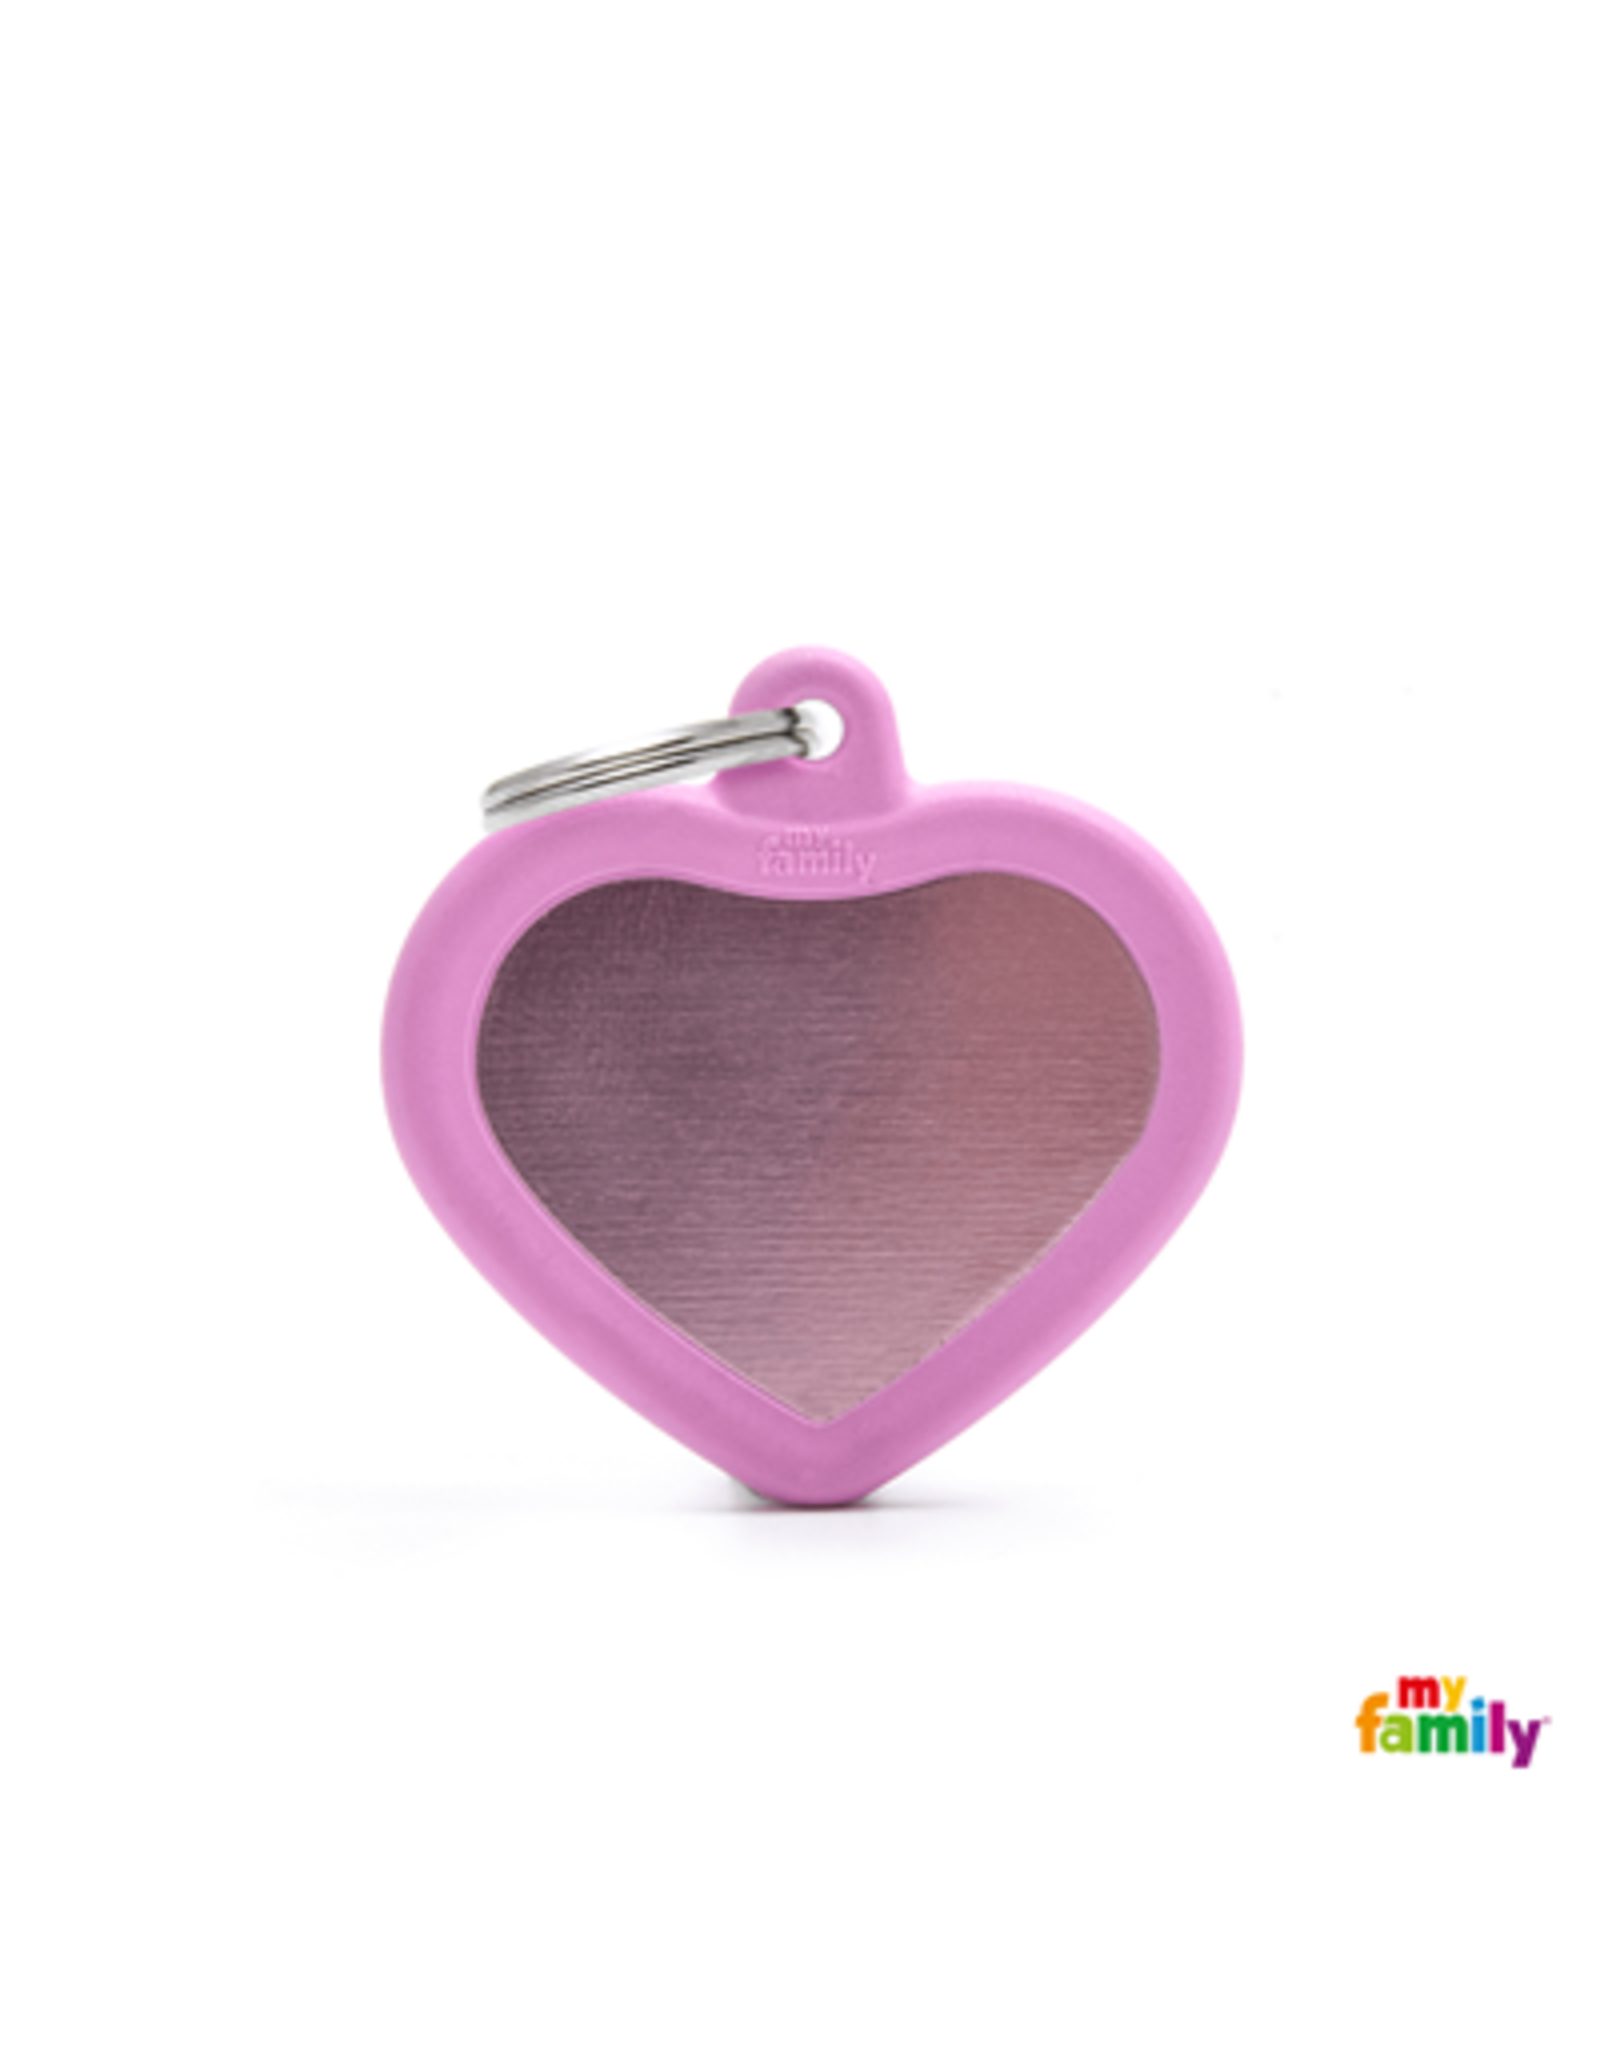 MyFamily Tag - Pink Heart Rubber